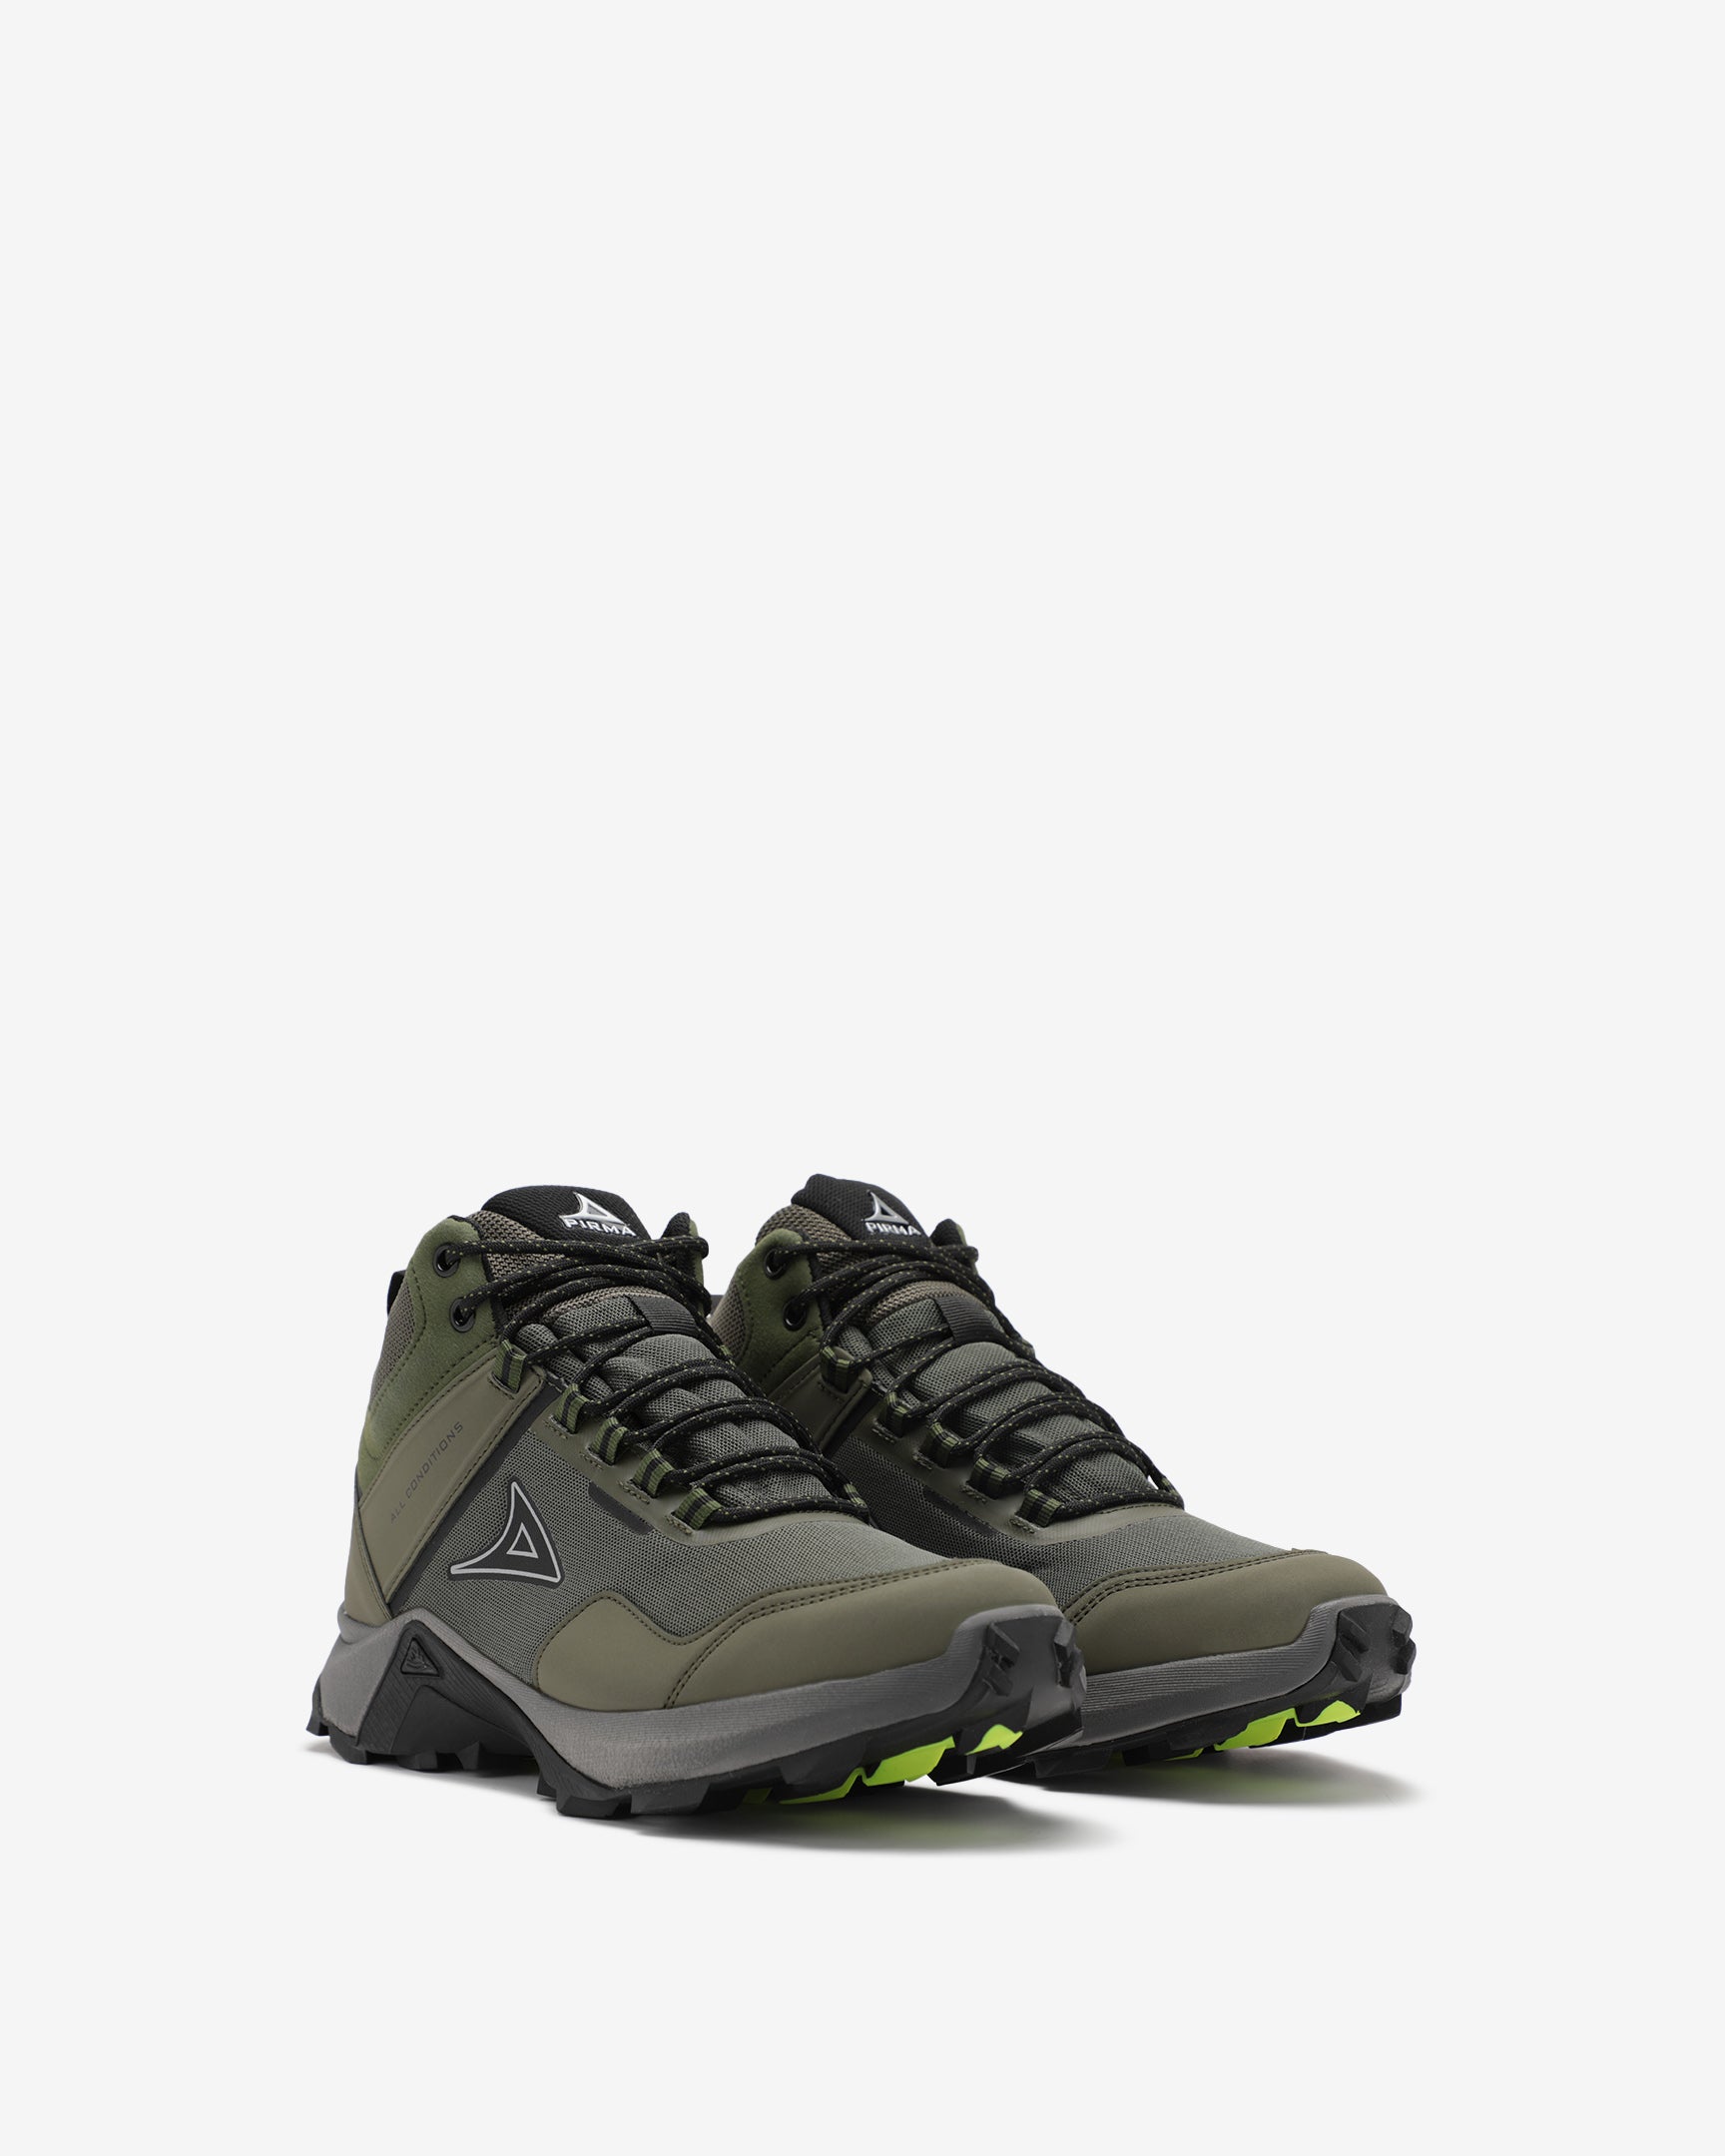 SNEAKERS EXTREME HOMBRE 1308 Pirma